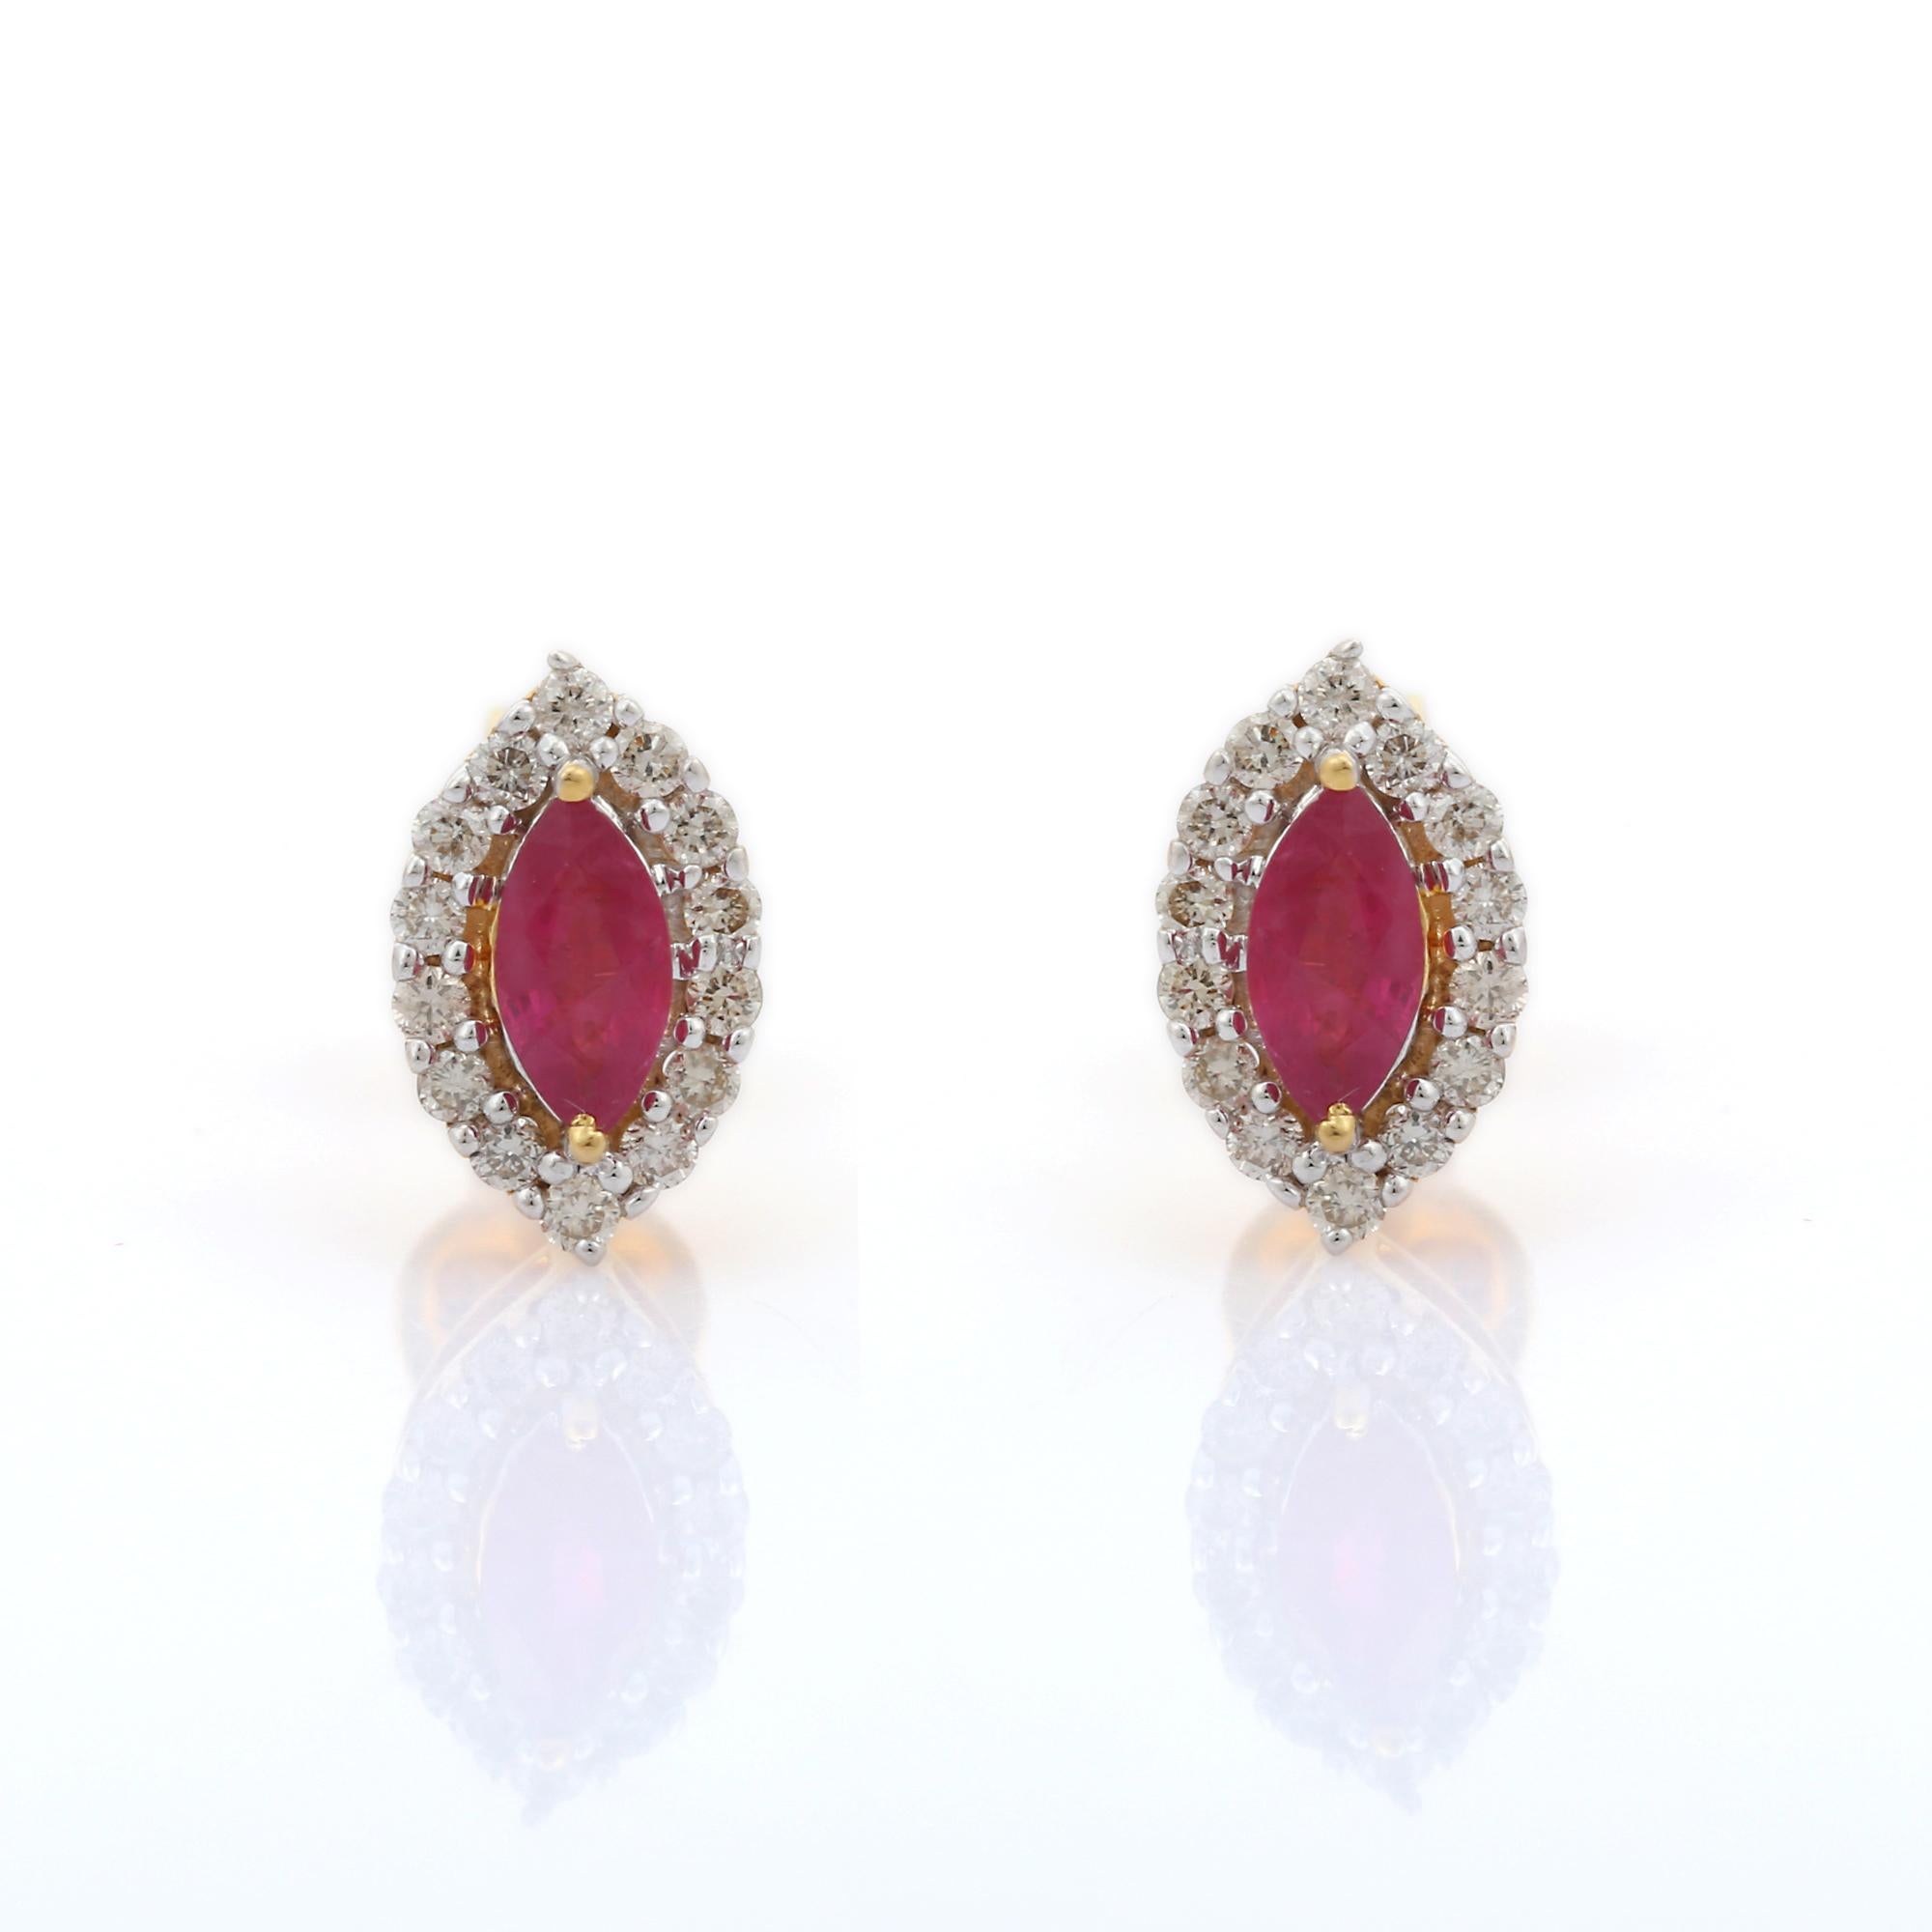 Studs create a subtle beauty while showcasing the colors of the natural precious gemstones and illuminating diamonds making a statement.
Marquise Cut Ruby Stud Earrings with Diamonds in 18K gold. Embrace your look with these stunning pair of